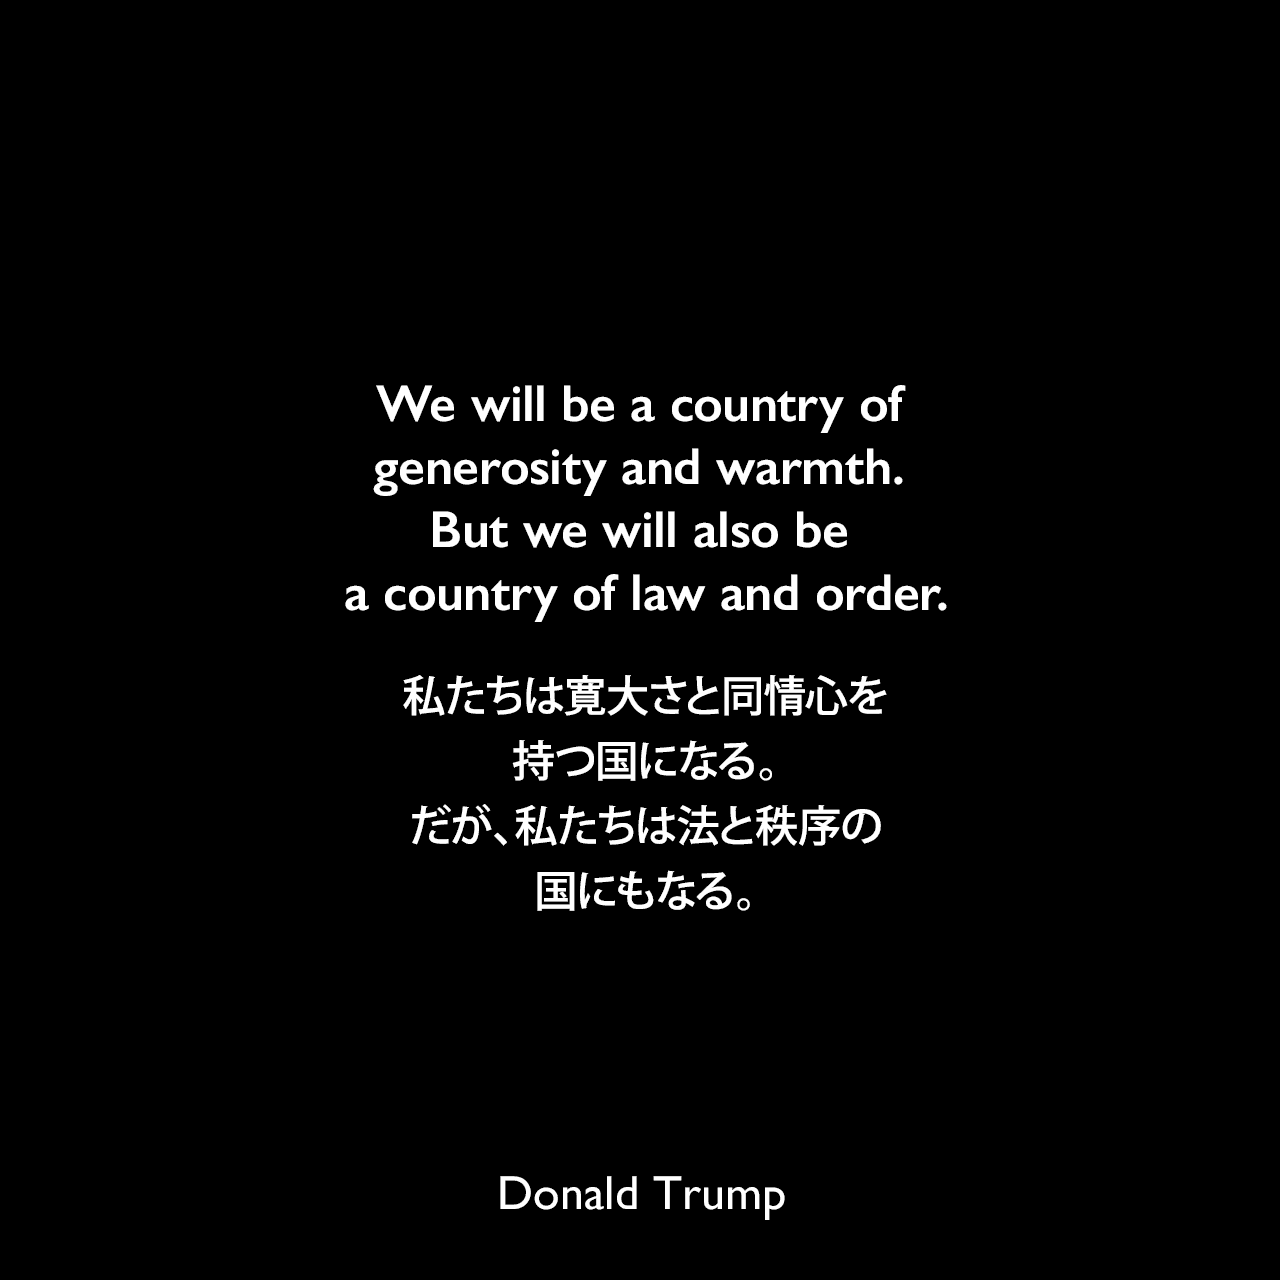 We will be a country of generosity and warmth. But we will also be a country of law and order.私たちは寛大さと同情心を持つ国になる。だが、私たちは法と秩序の国にもなる。Donald Trump